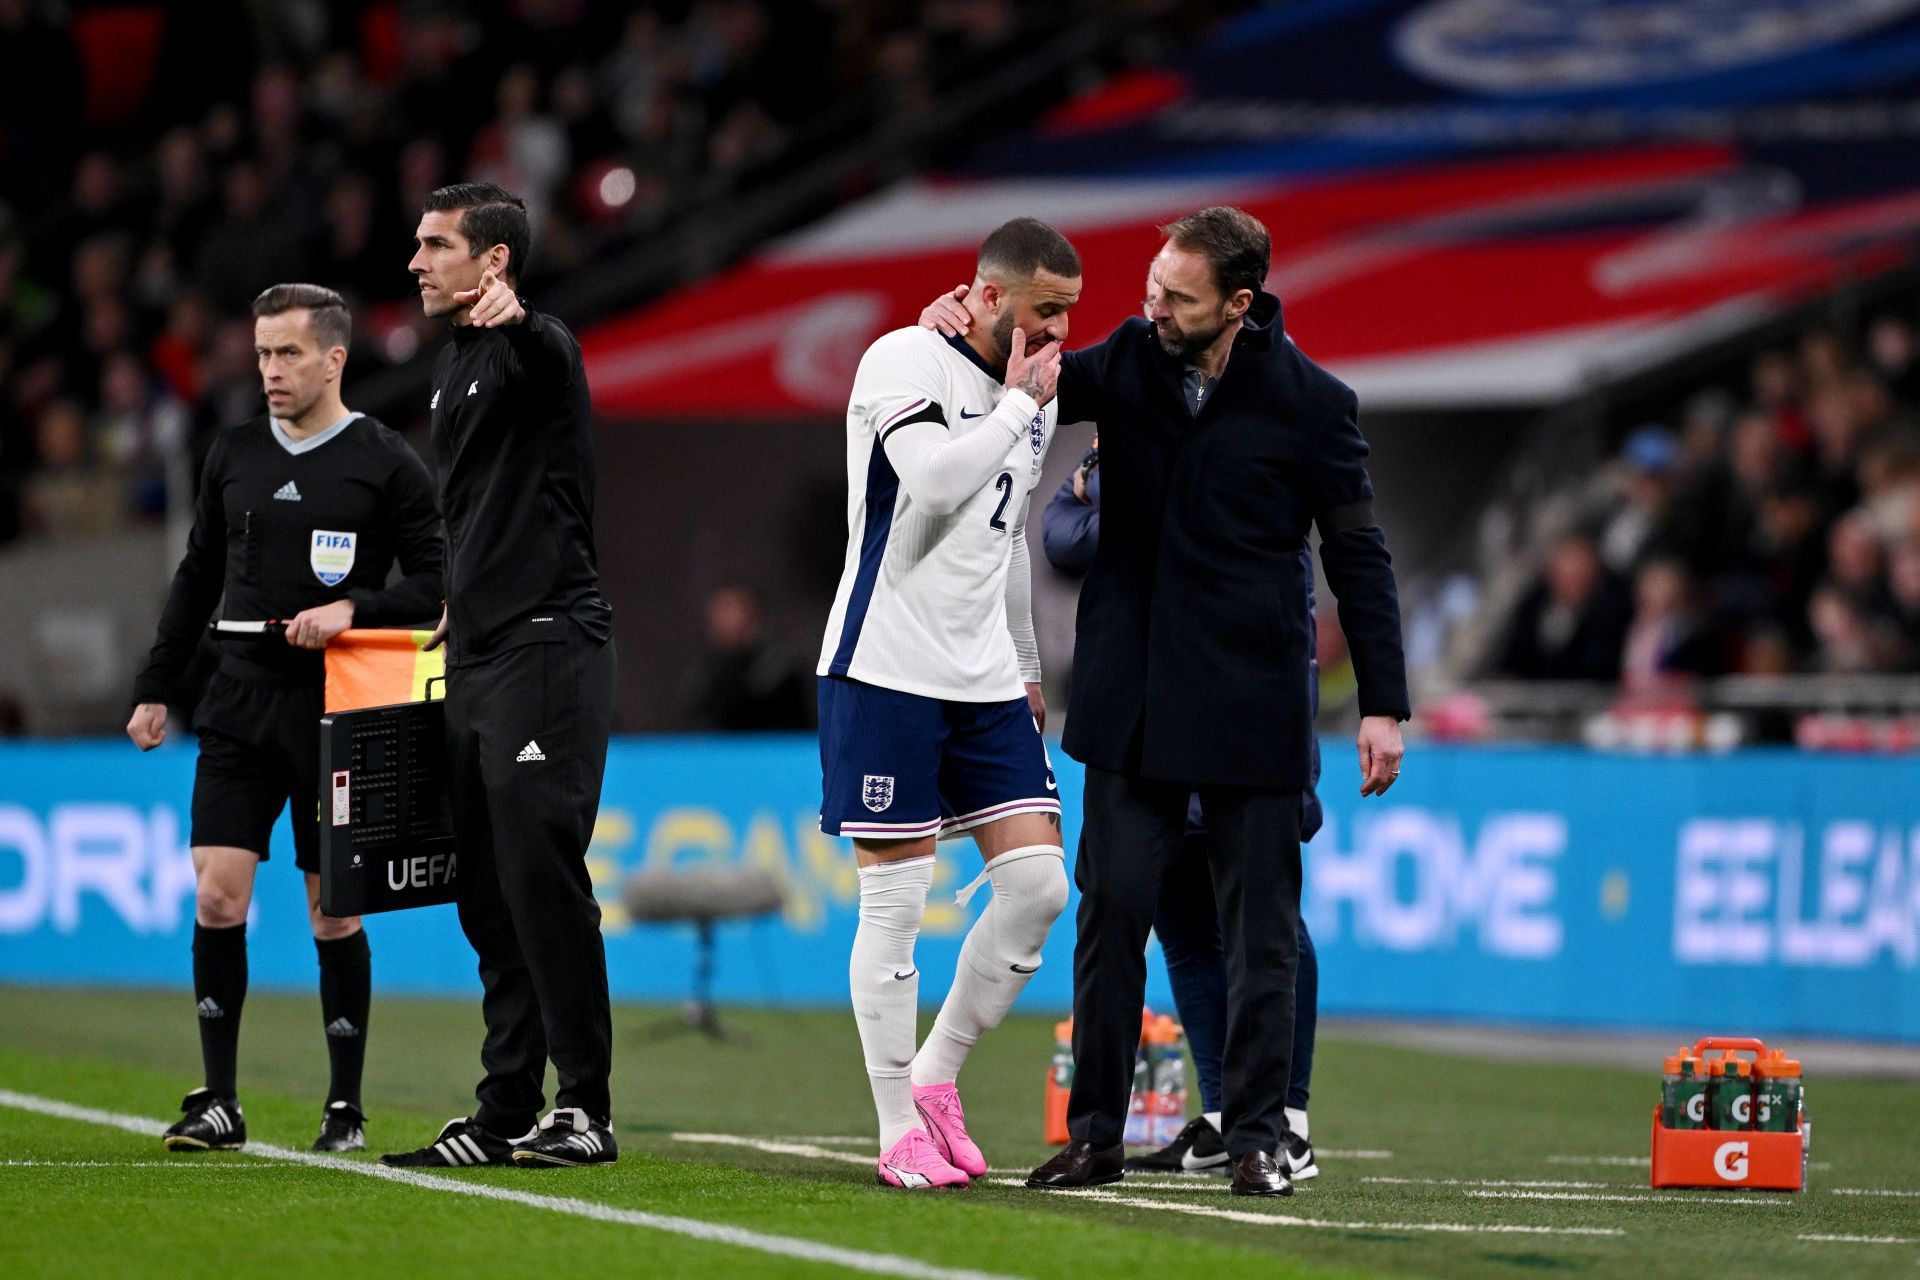 Kyle Walker could miss the clash due to a hamstring issue.